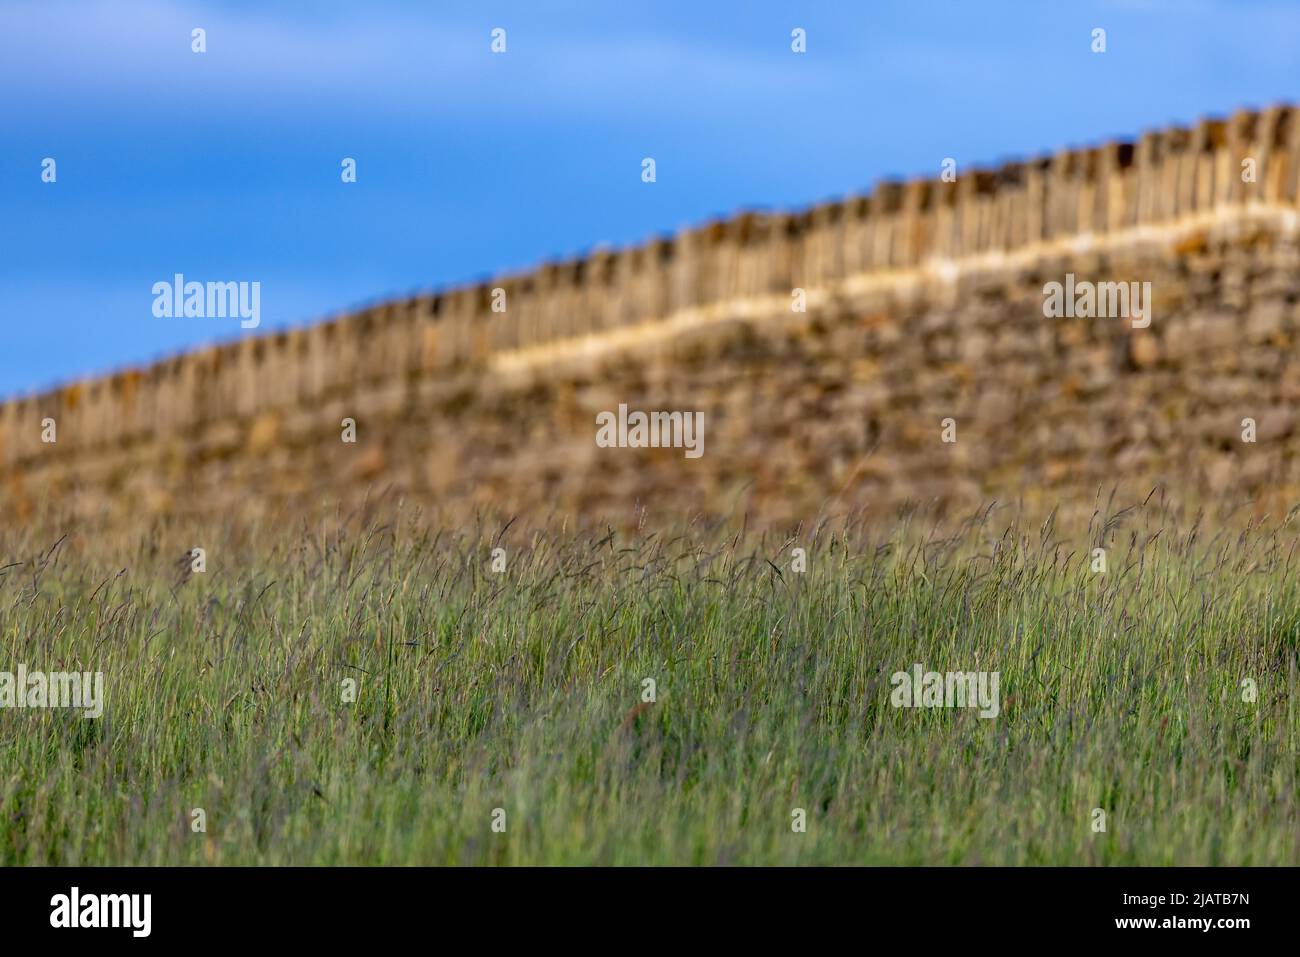 Dry stone wall in Bury countryside. Stock Photo